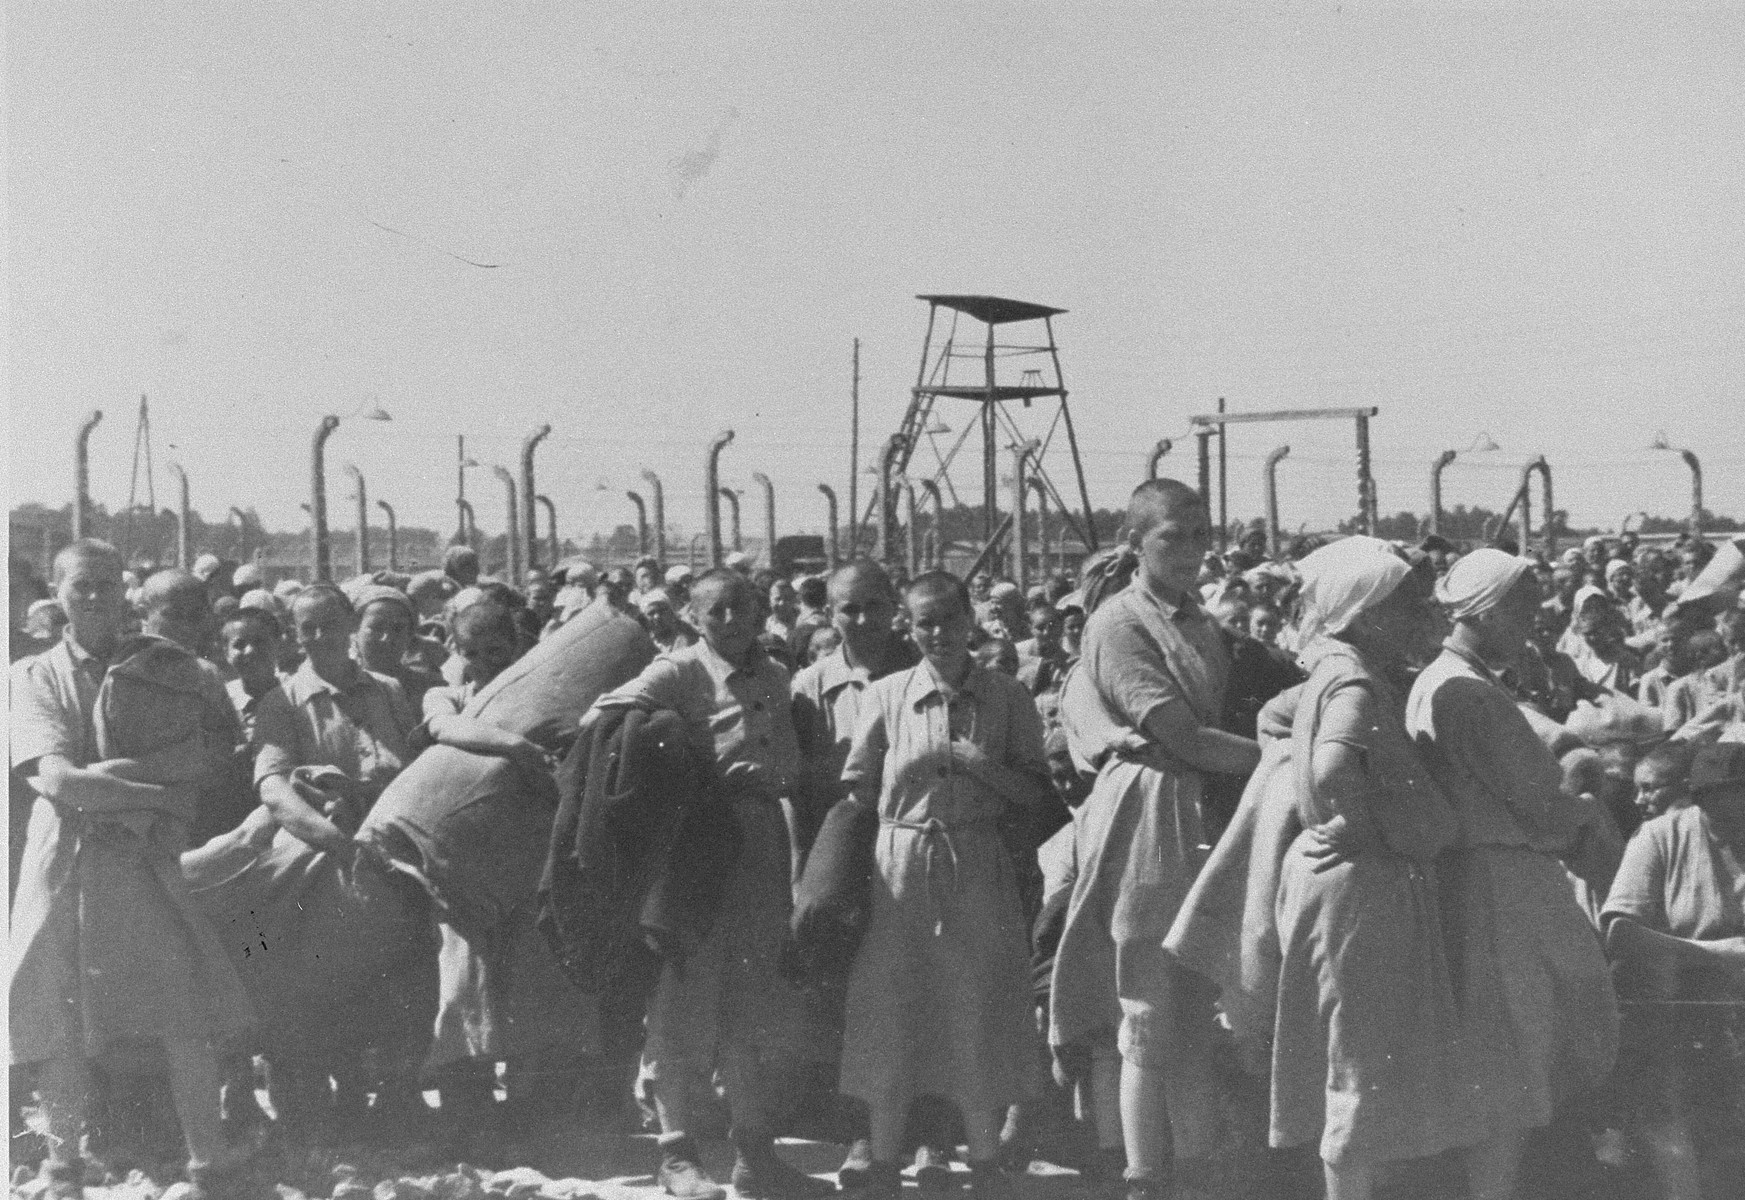 Jewish women from Subcarpathian Rus who have been selected for forced labor at Auschwitz-Birkenau, march toward their barracks after disinfection and headshaving.